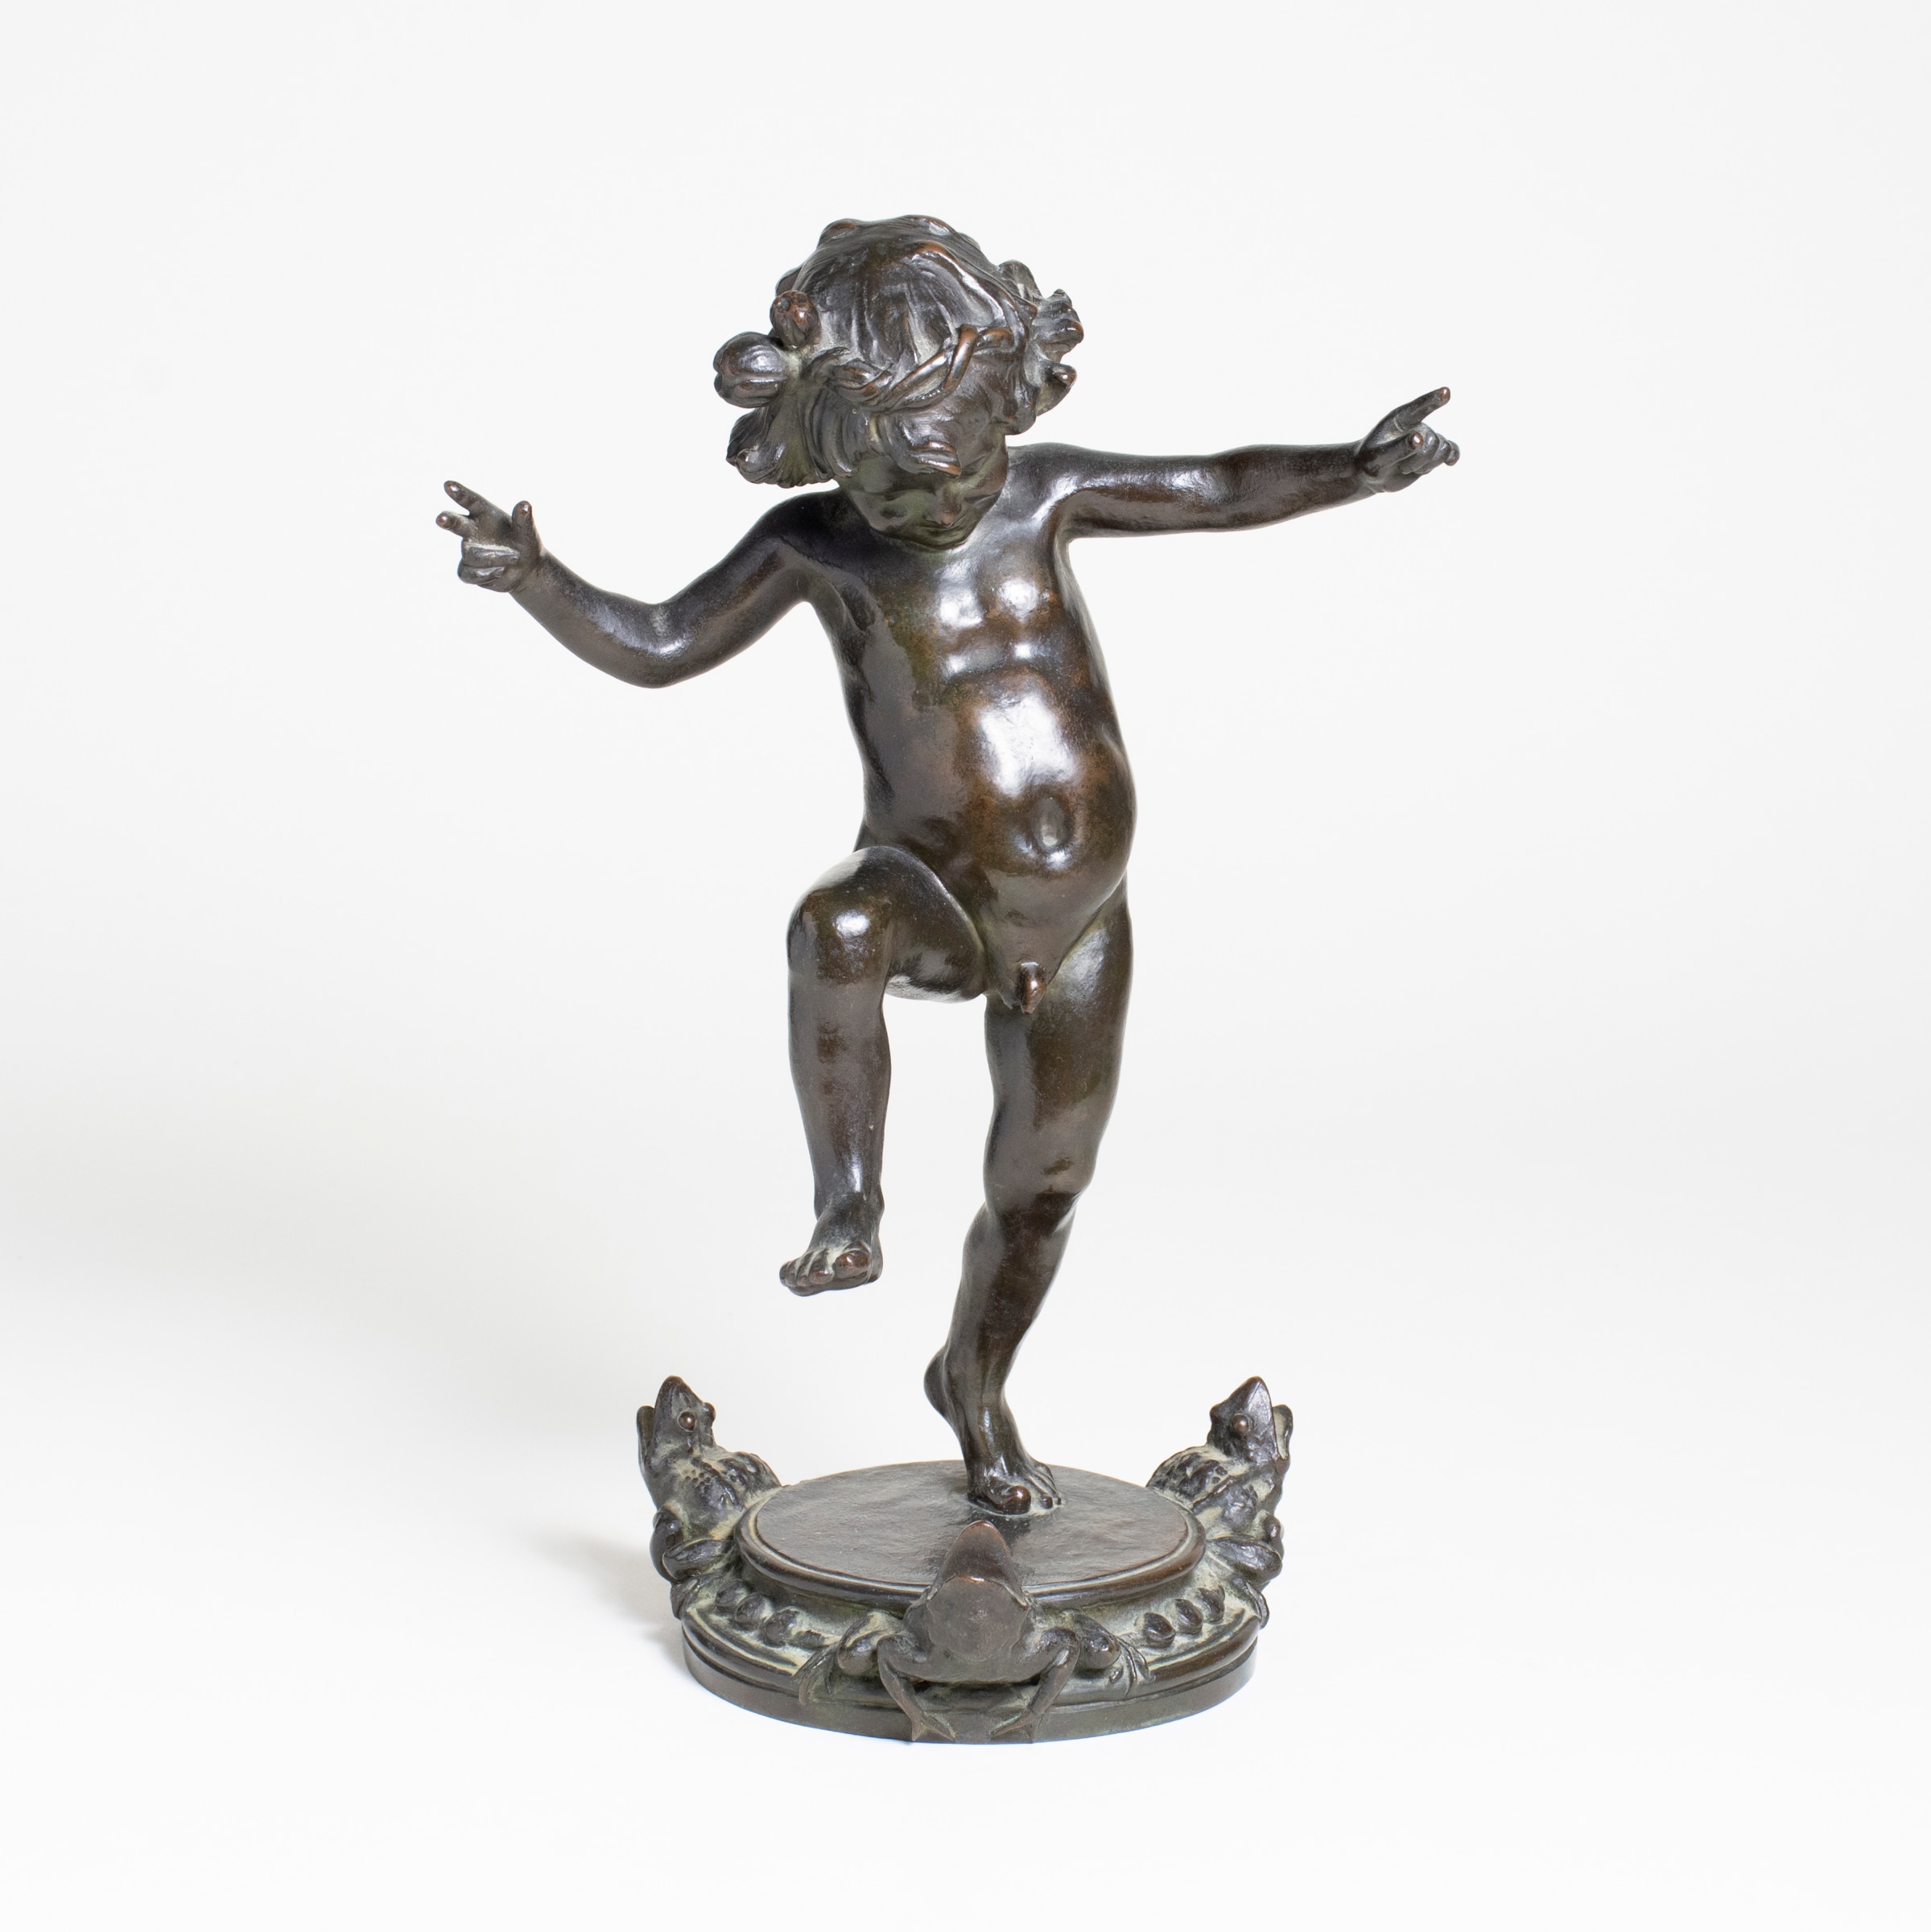 a sculpture of a playful small child frolicking on one foot, the other leg raised, the arms outstretched in a dance like gesture, smiling and laughing. the circular base of the statue features three small frogs and functions as a fountain